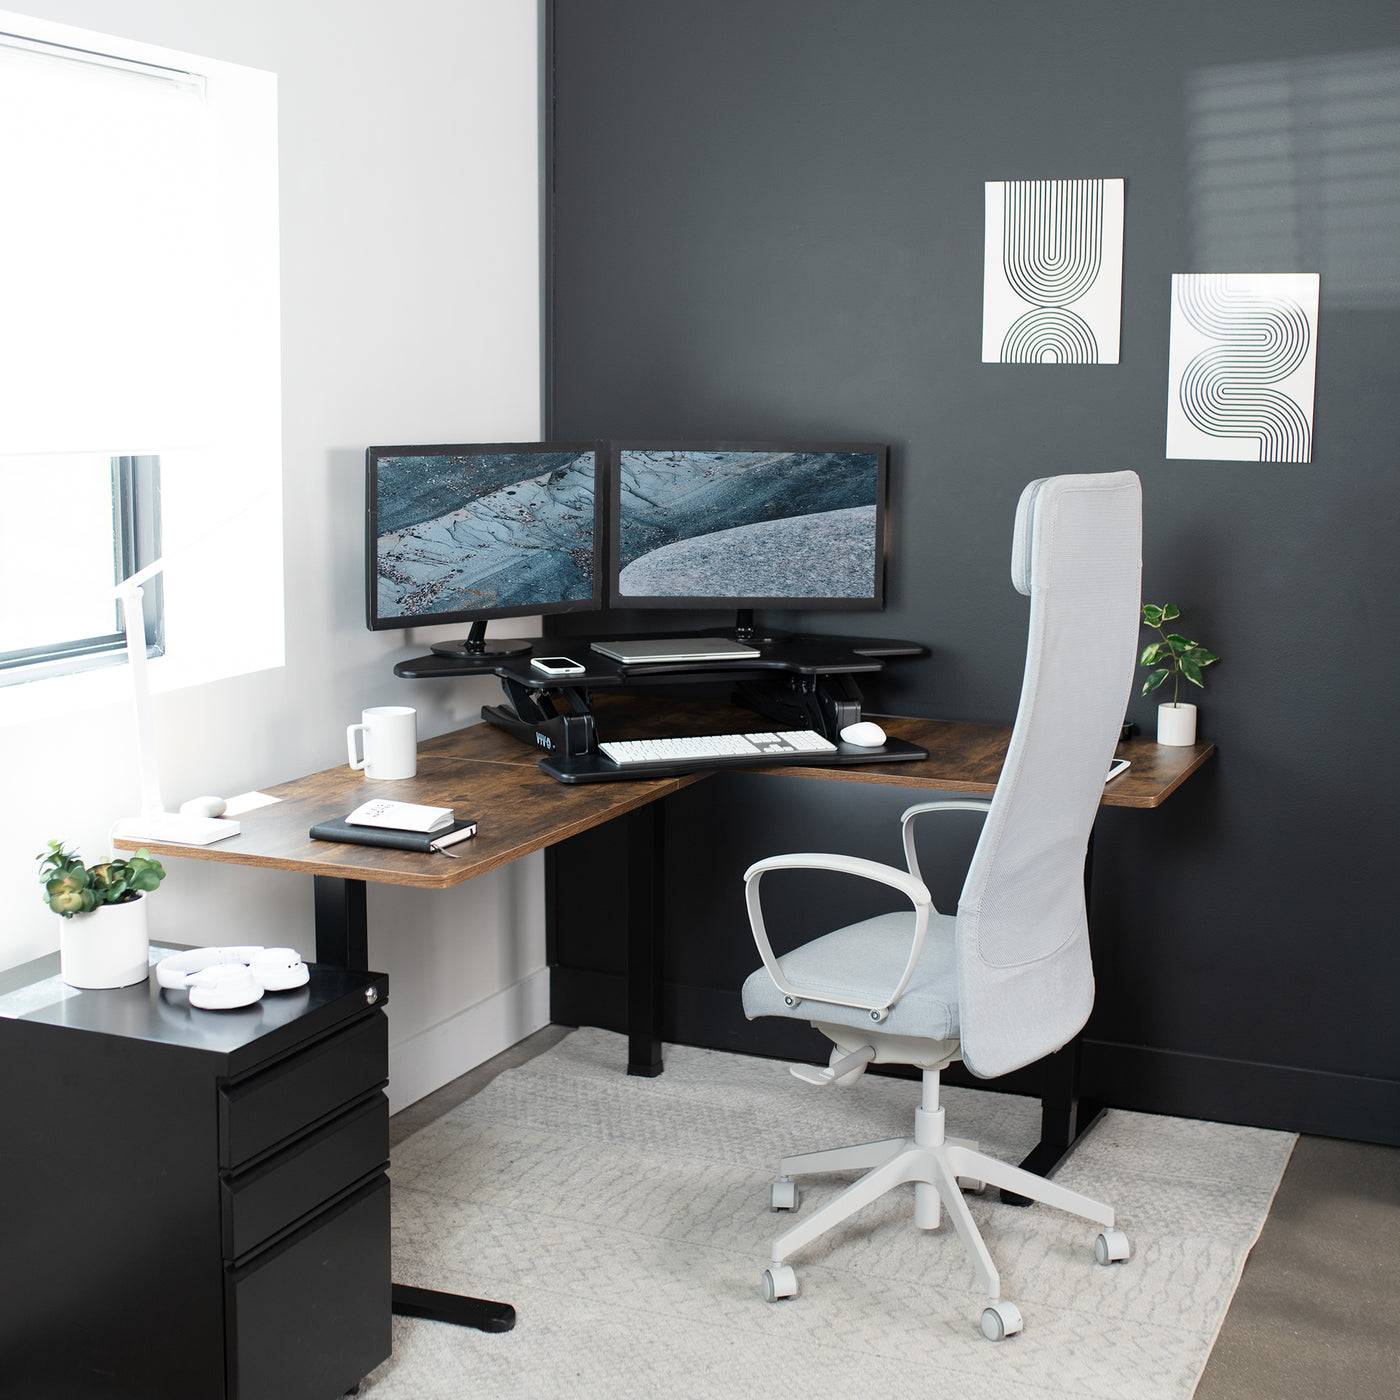 Heavy-duty height adjustable corner desk converter allowing for a spacious workspace.